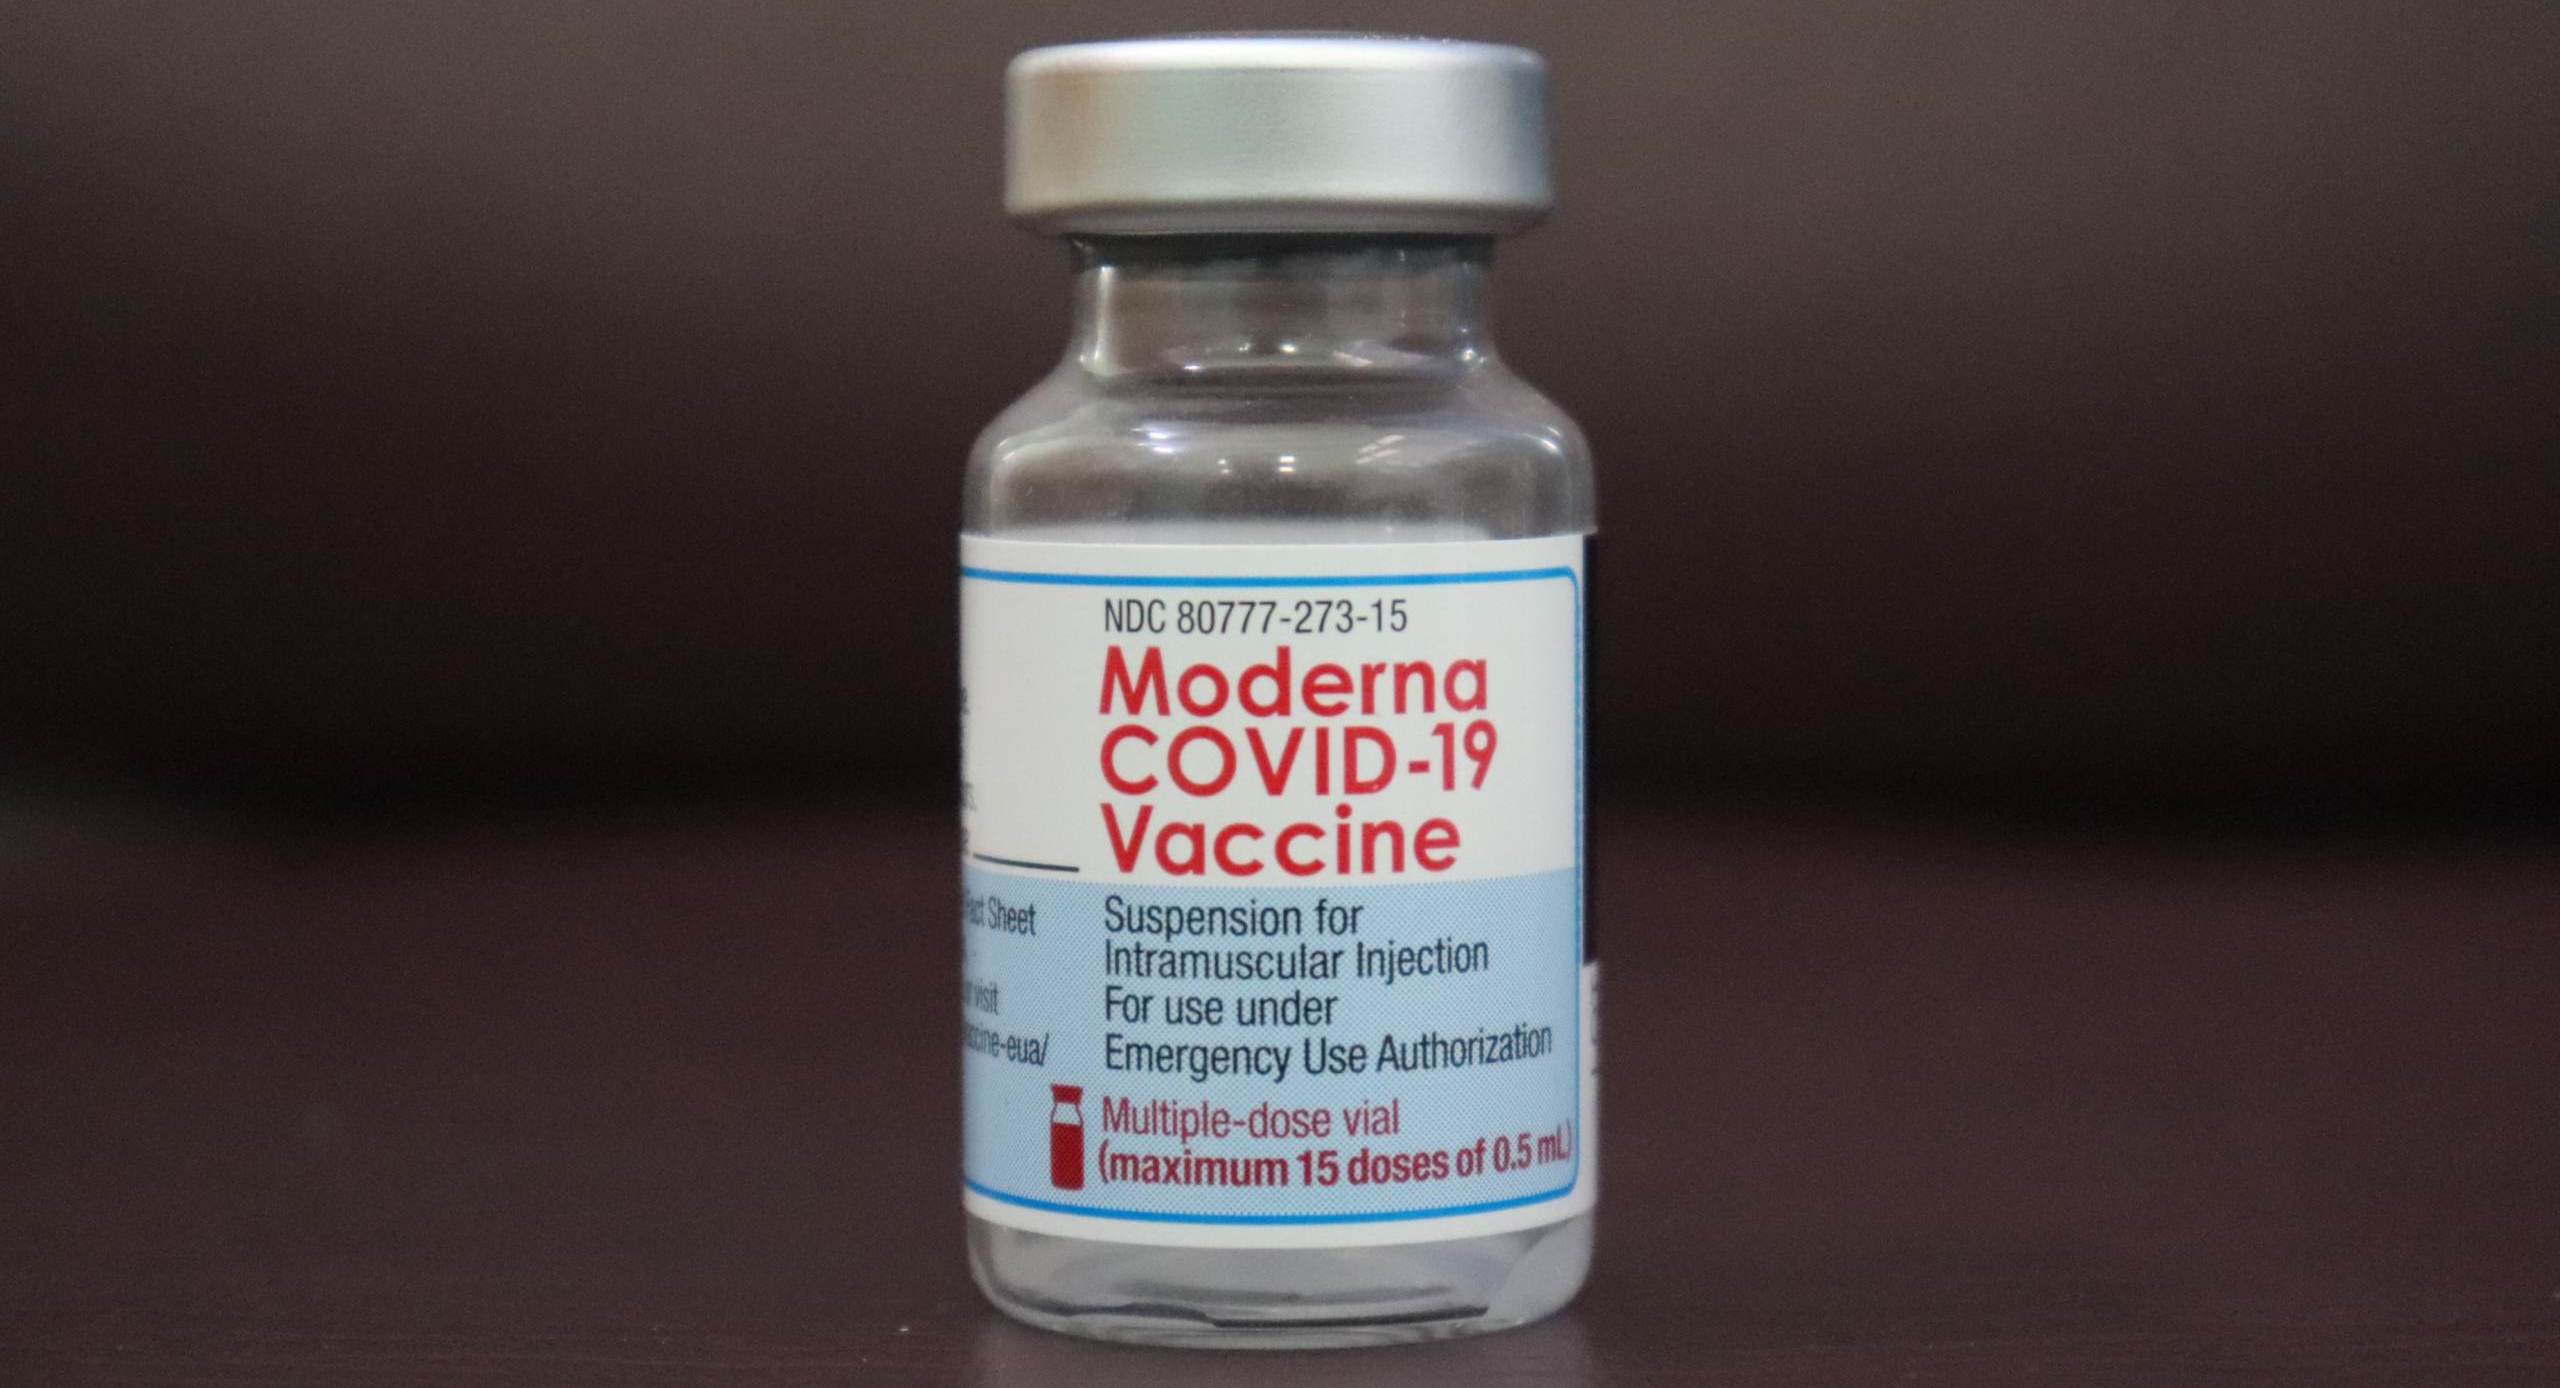 Moderna Plans to Develop mRNA Vaccines to 15 Pathogens Identified as Persistent Global Health Threats Including HIV, Tuberculosis, and Malaria